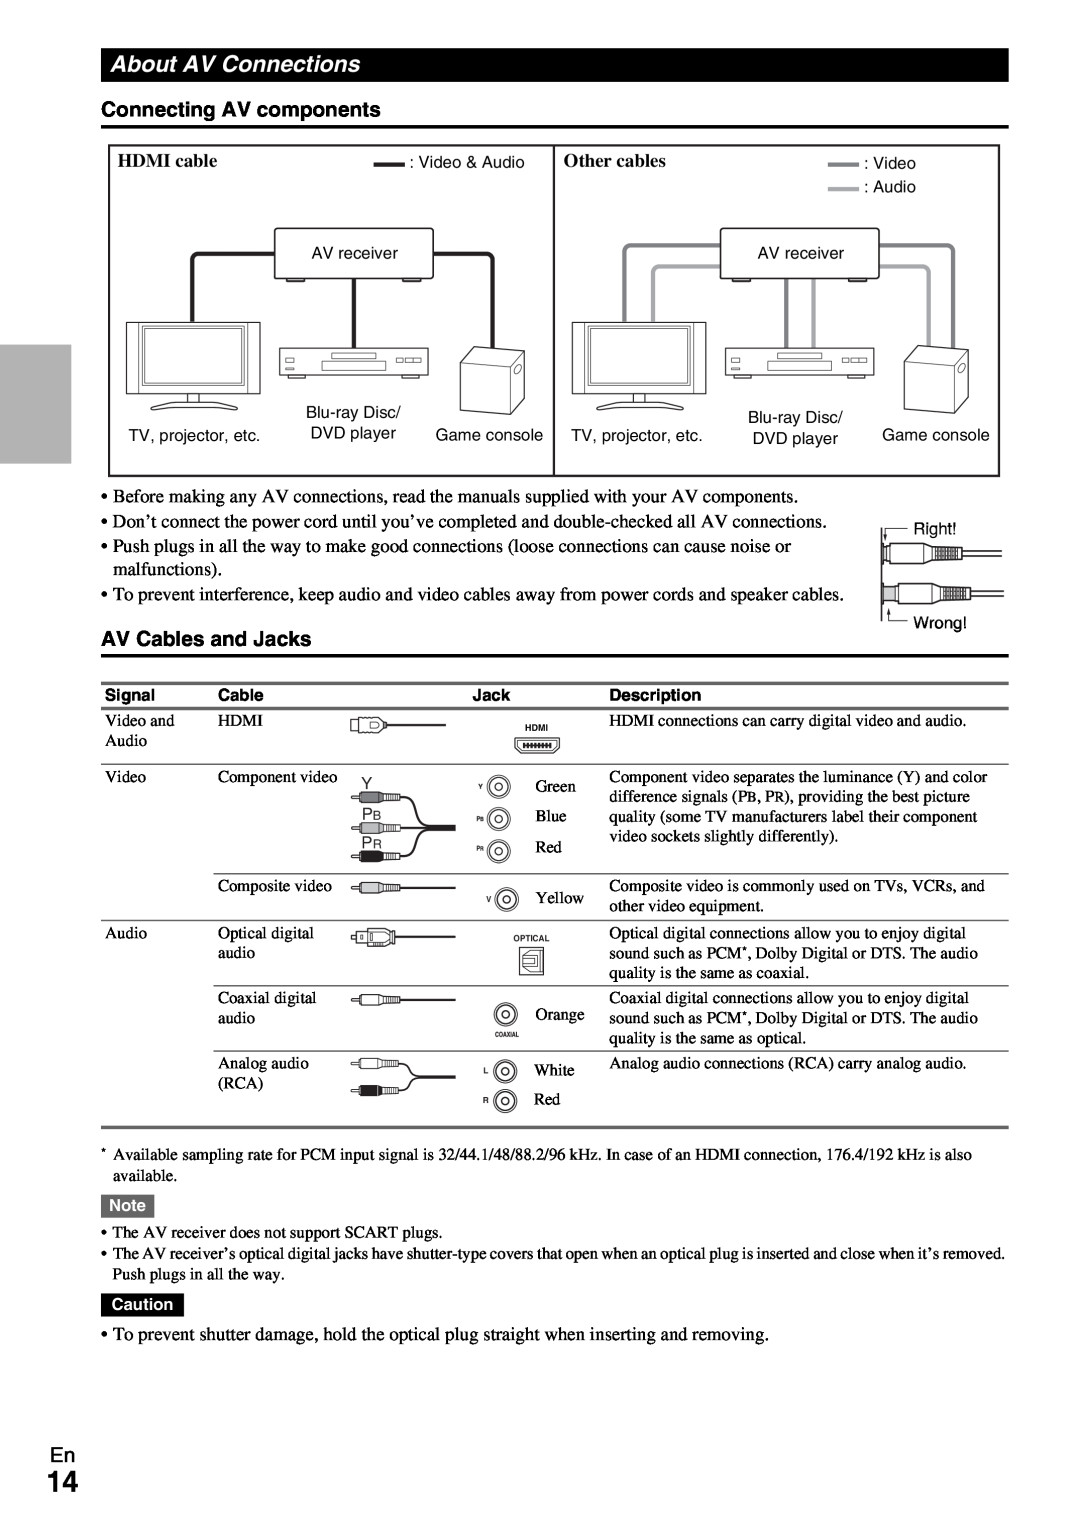 Onkyo TX-NR509 instruction manual About AV Connections, Connecting AV components, AV Cables and Jacks 